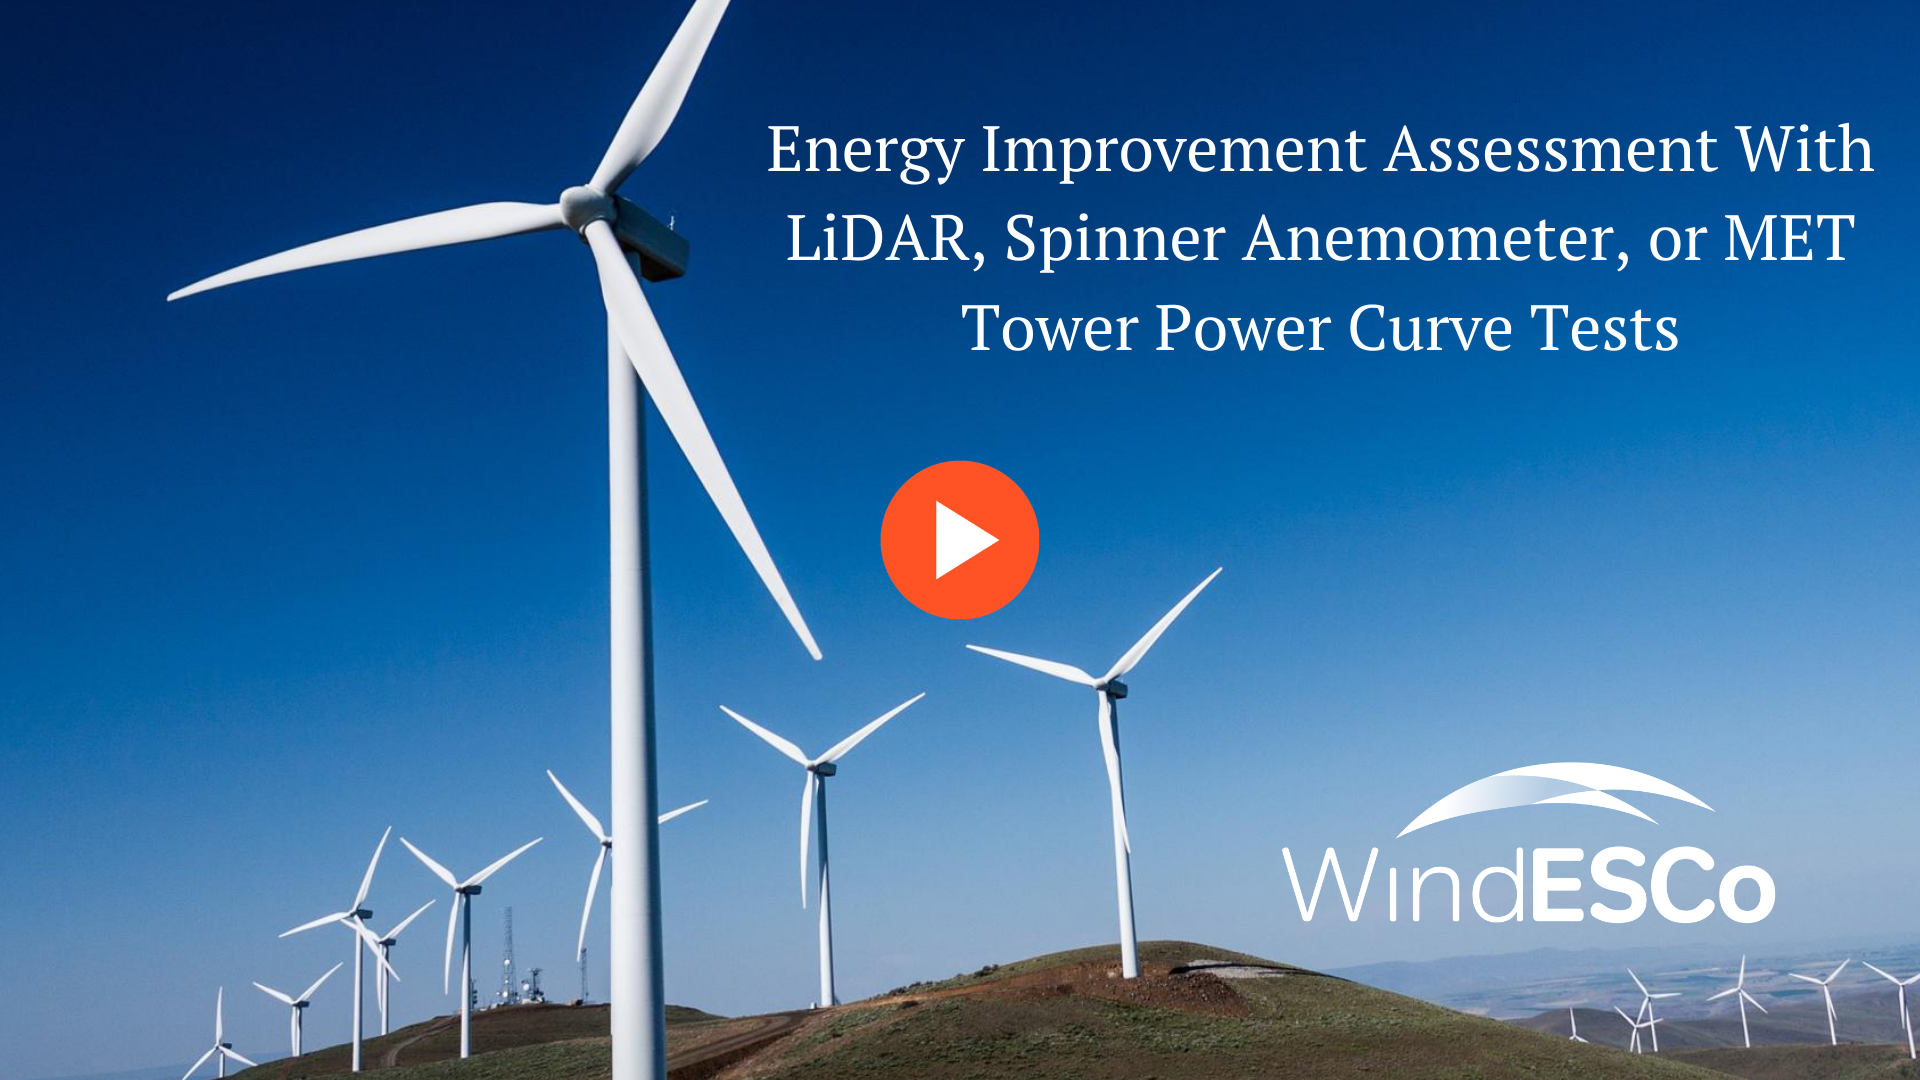 Energy Improvement Assessment With LiDAR, Spinner Anemometer, or Met Tower Power Curve Tests